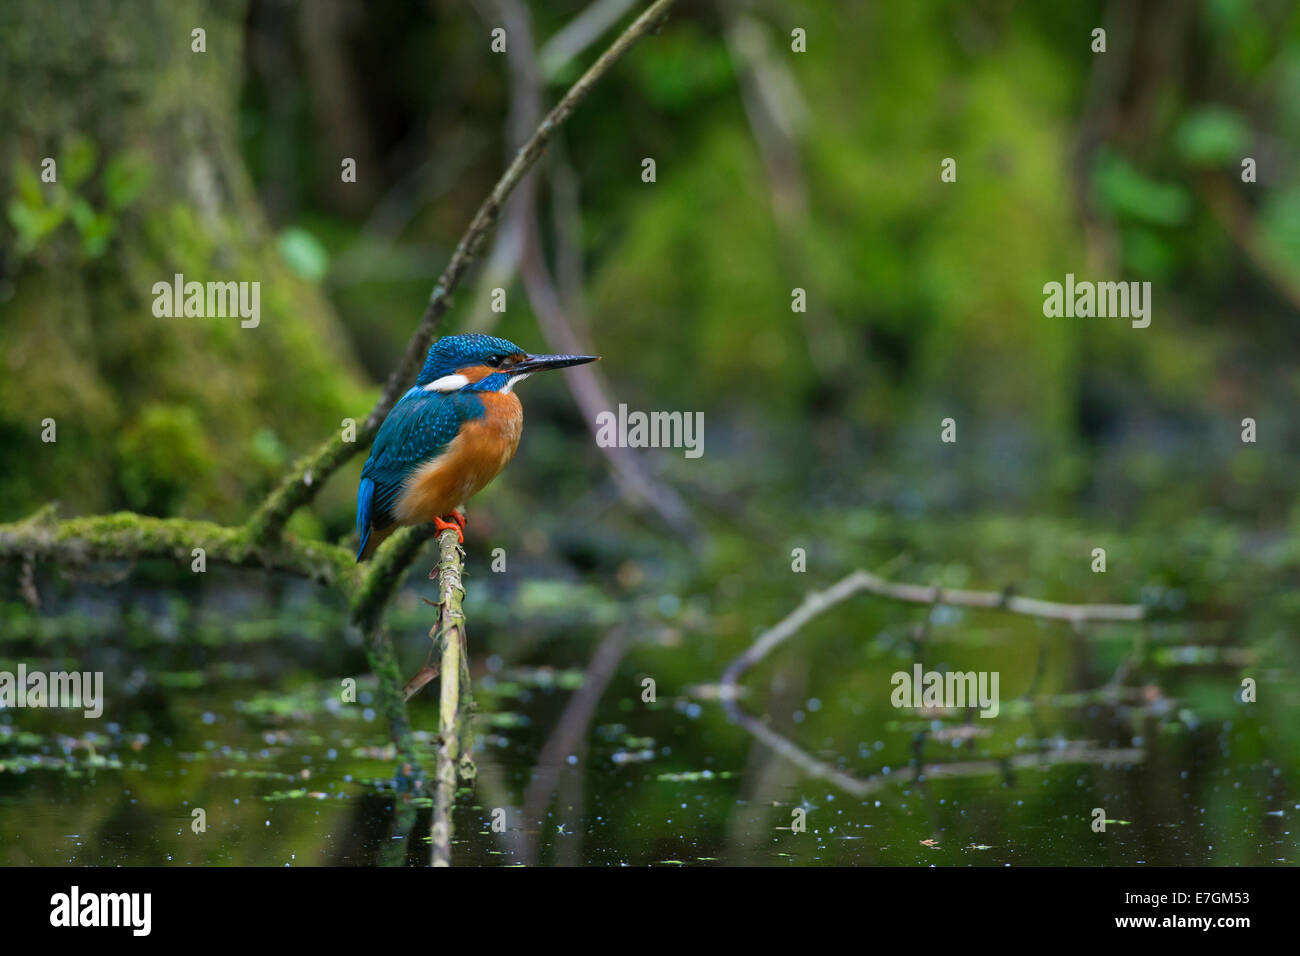 Common kingfisher / Eurasian kingfisher (Alcedo atthis) perched on branch and on the lookout for fish in pond Stock Photo